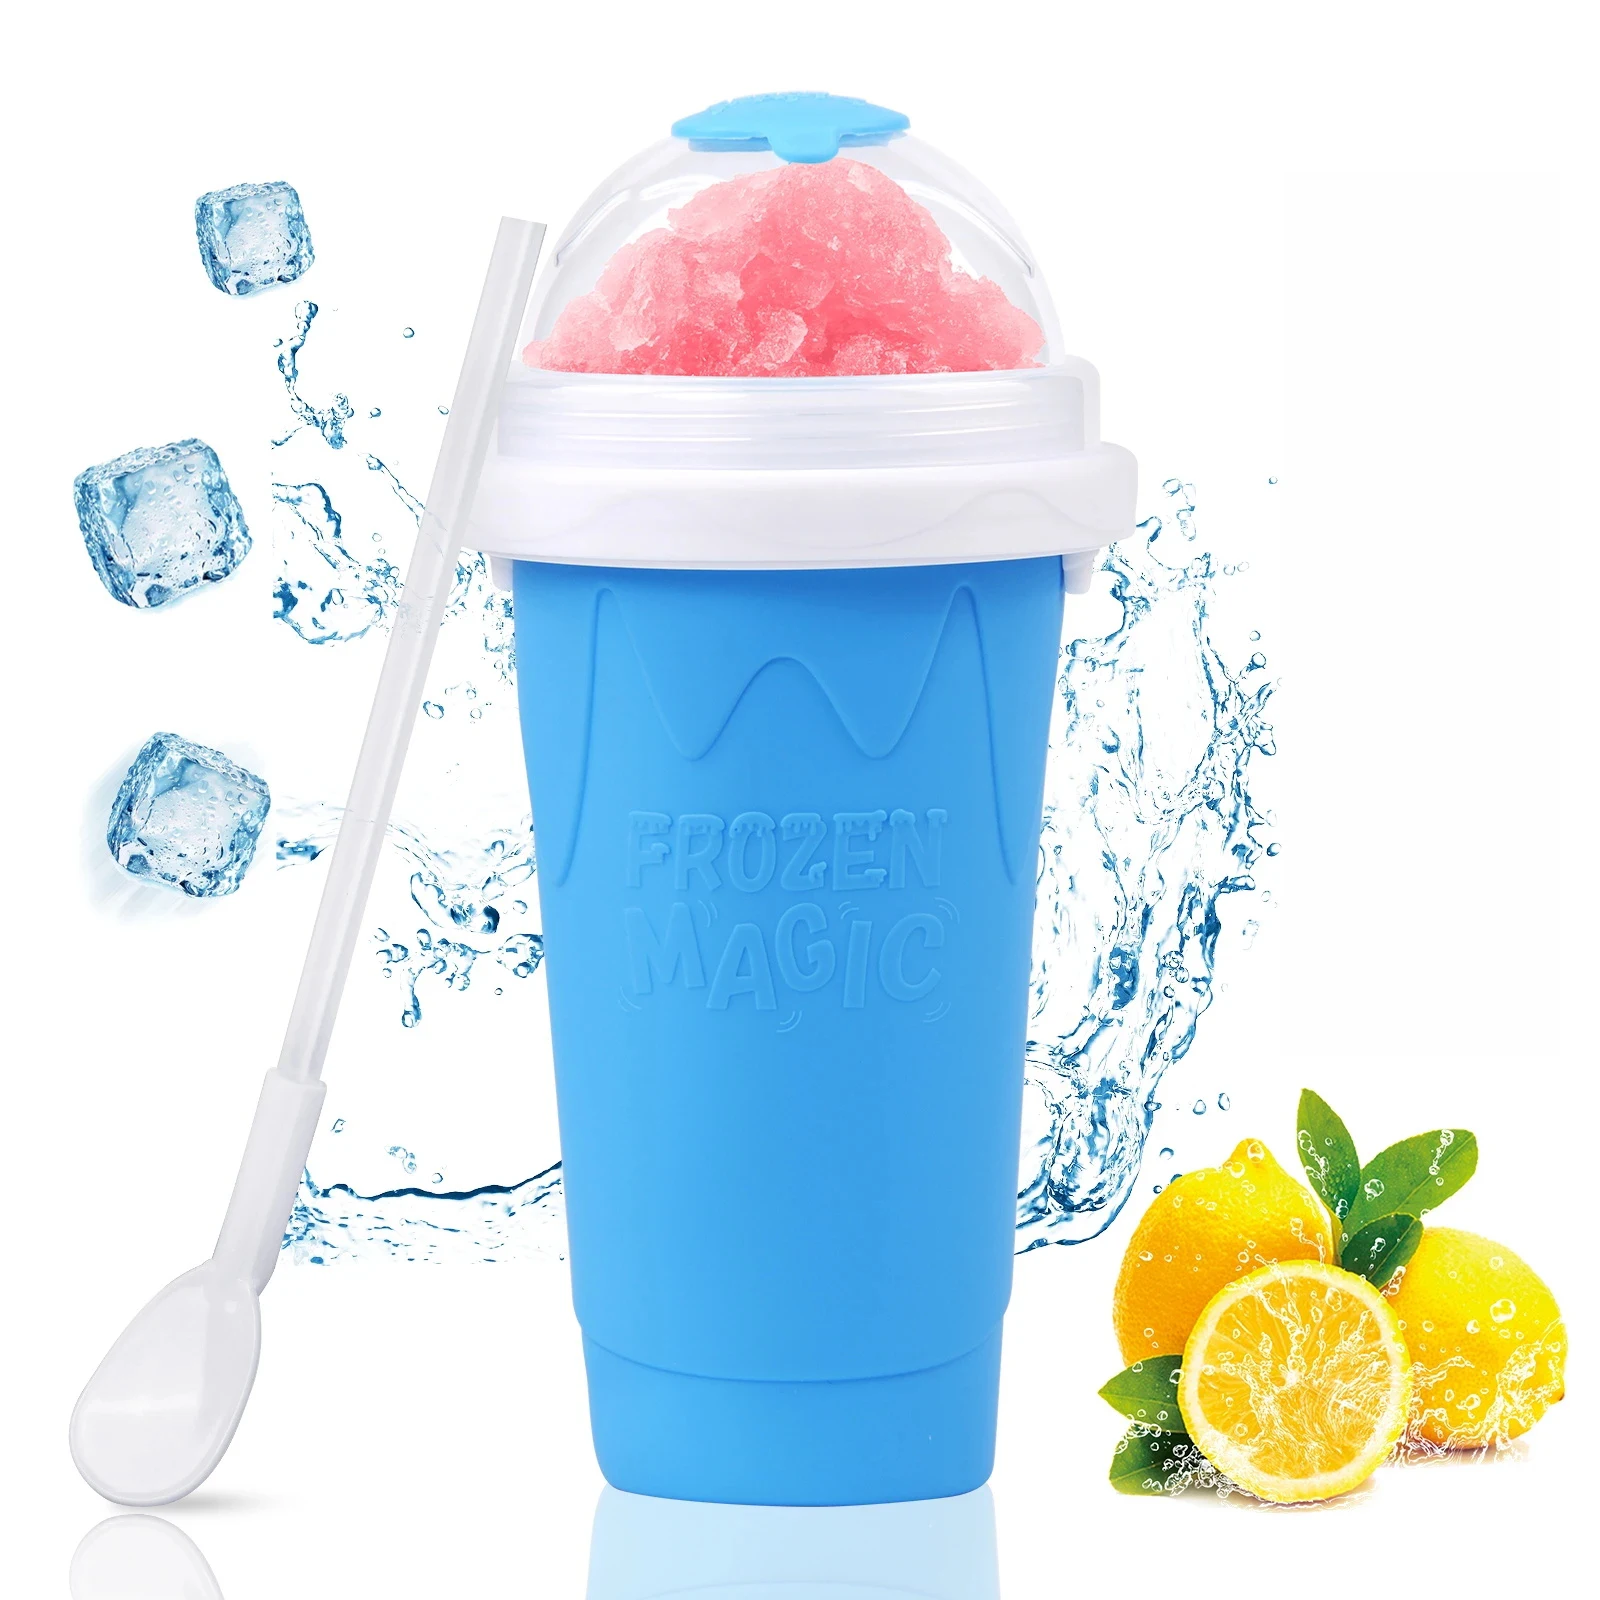 

Homemade Portable Smoothie Mug Ice Cream Maker Frozen Magic Double Layer Squeeze Freeze Slushie Maker Cups for Juices Quick